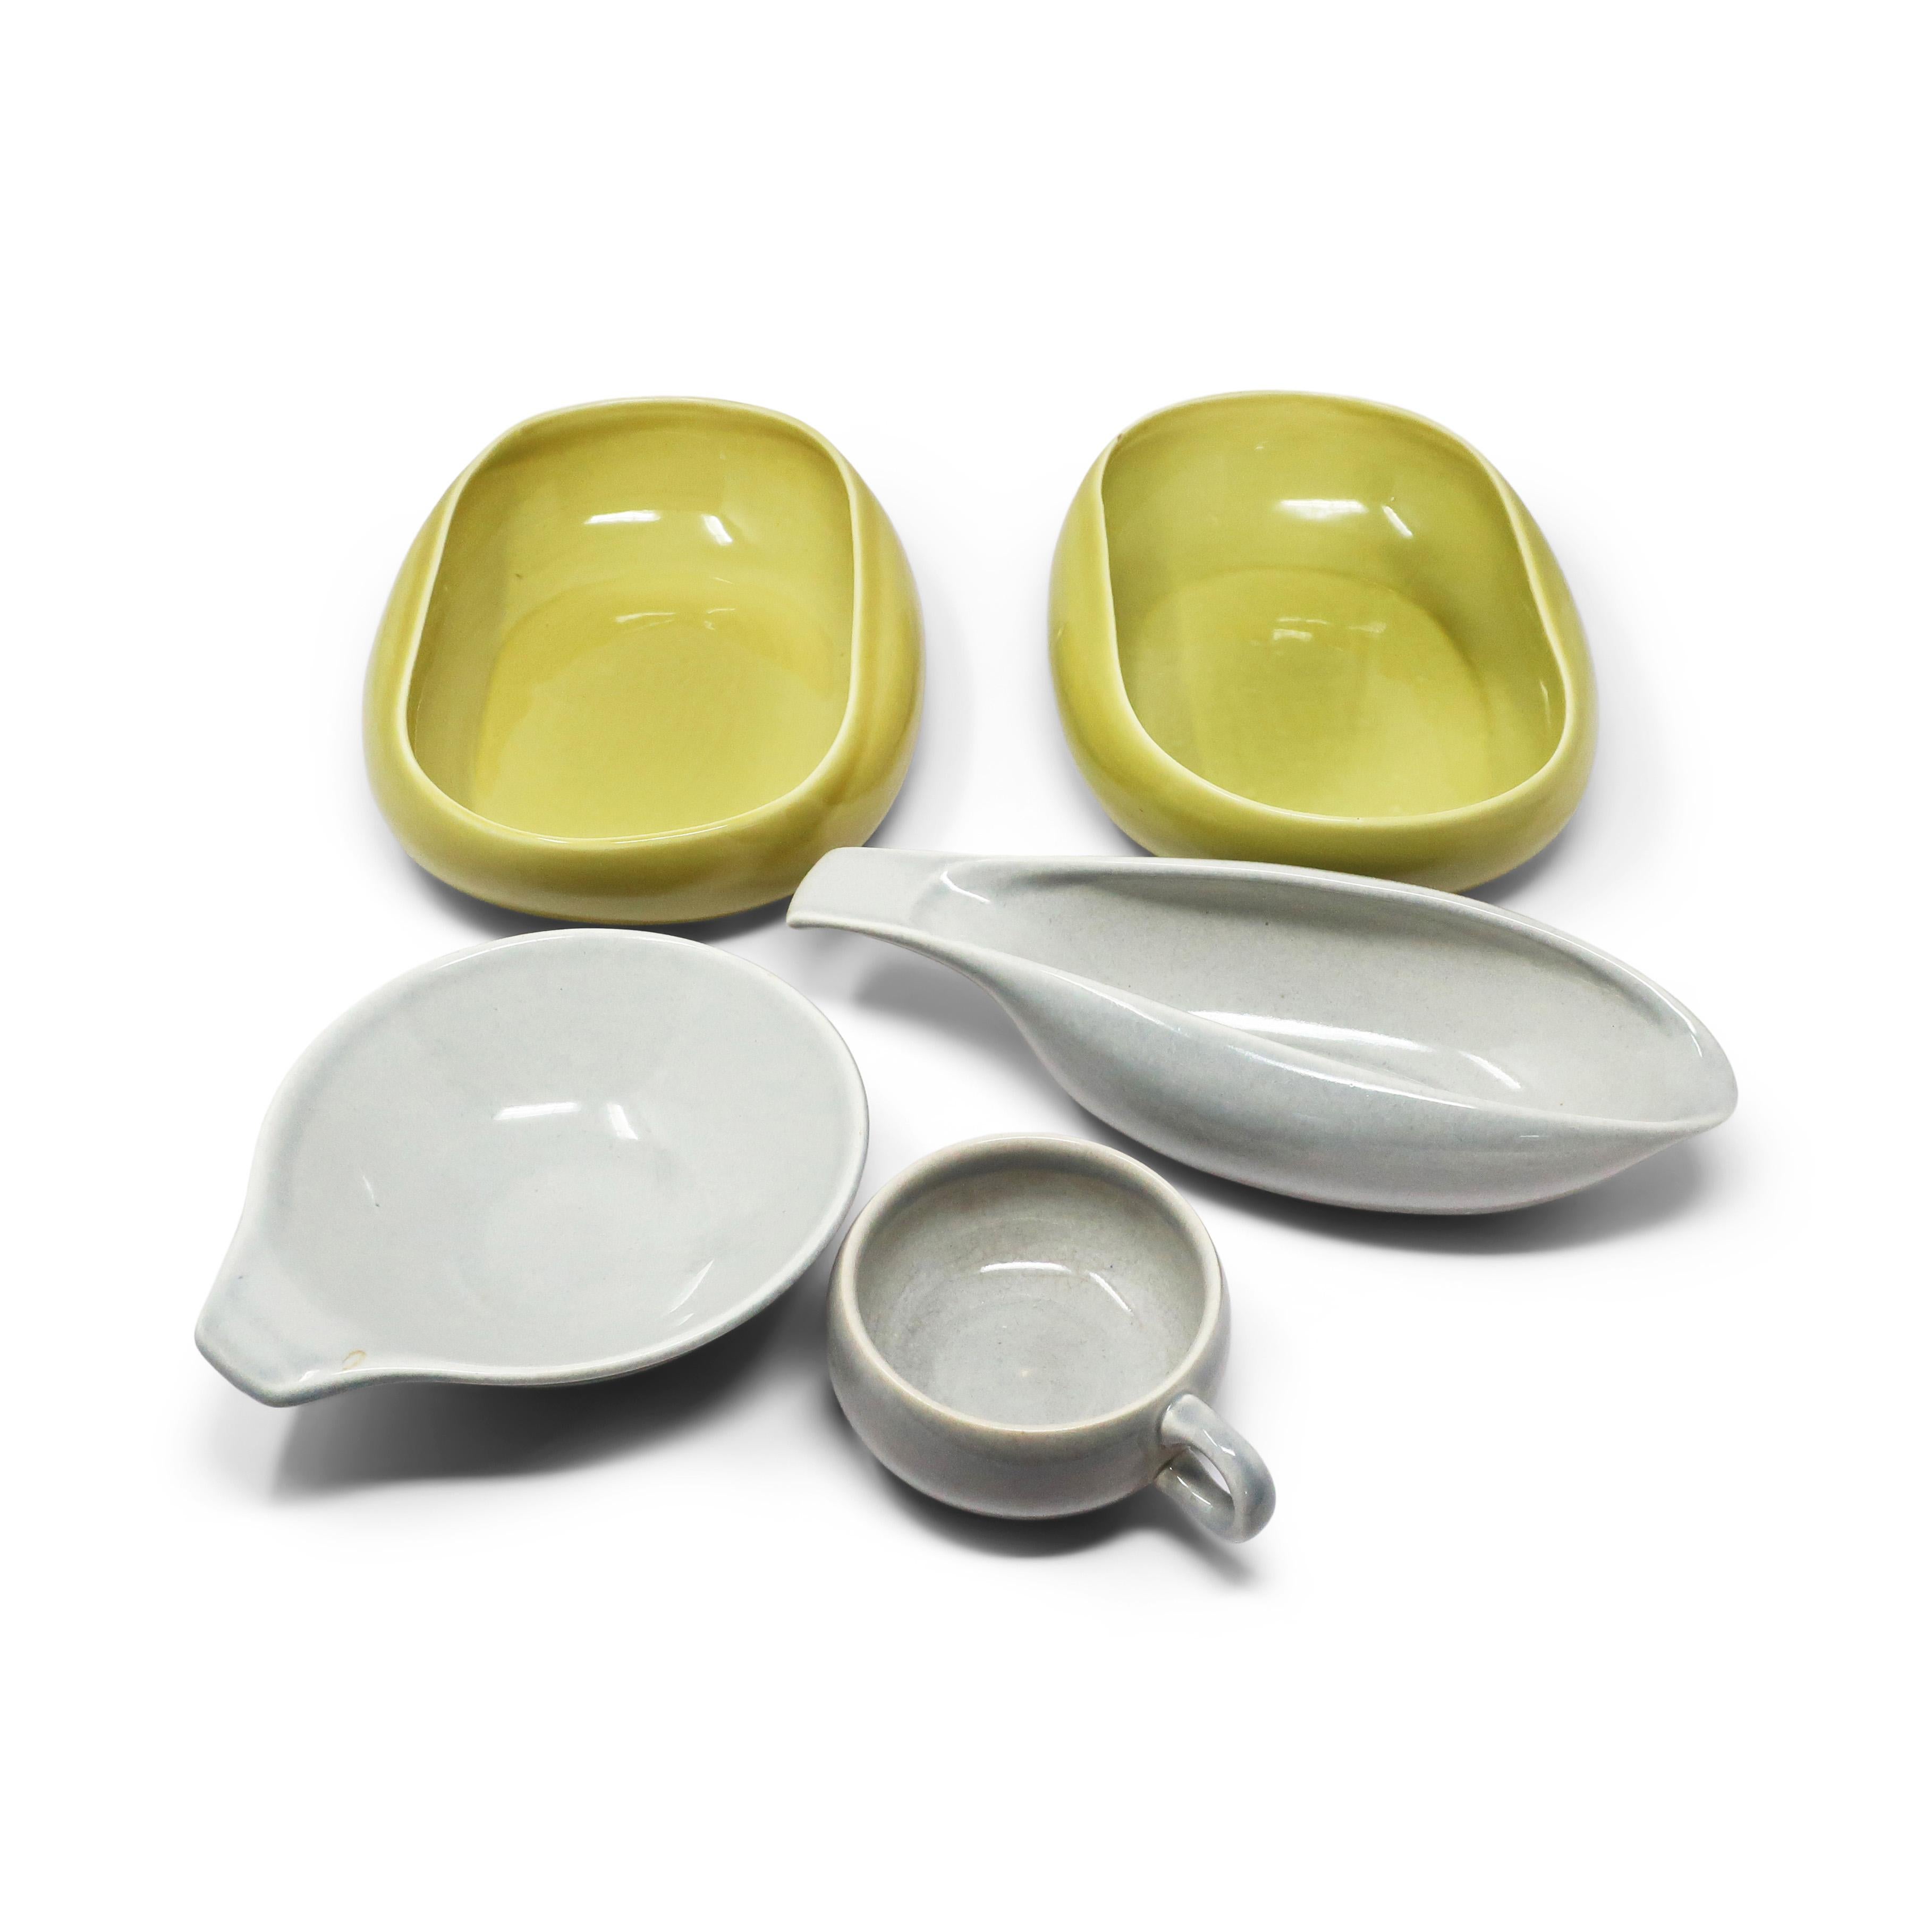 A five piece collection of vintage Russell Wright for Steubenville ceramic serving pieces. Mid century modern design at its best in light grey and green. Two large serving bowls, one that looks like a gravy boat, one small serving bowl, and a tea